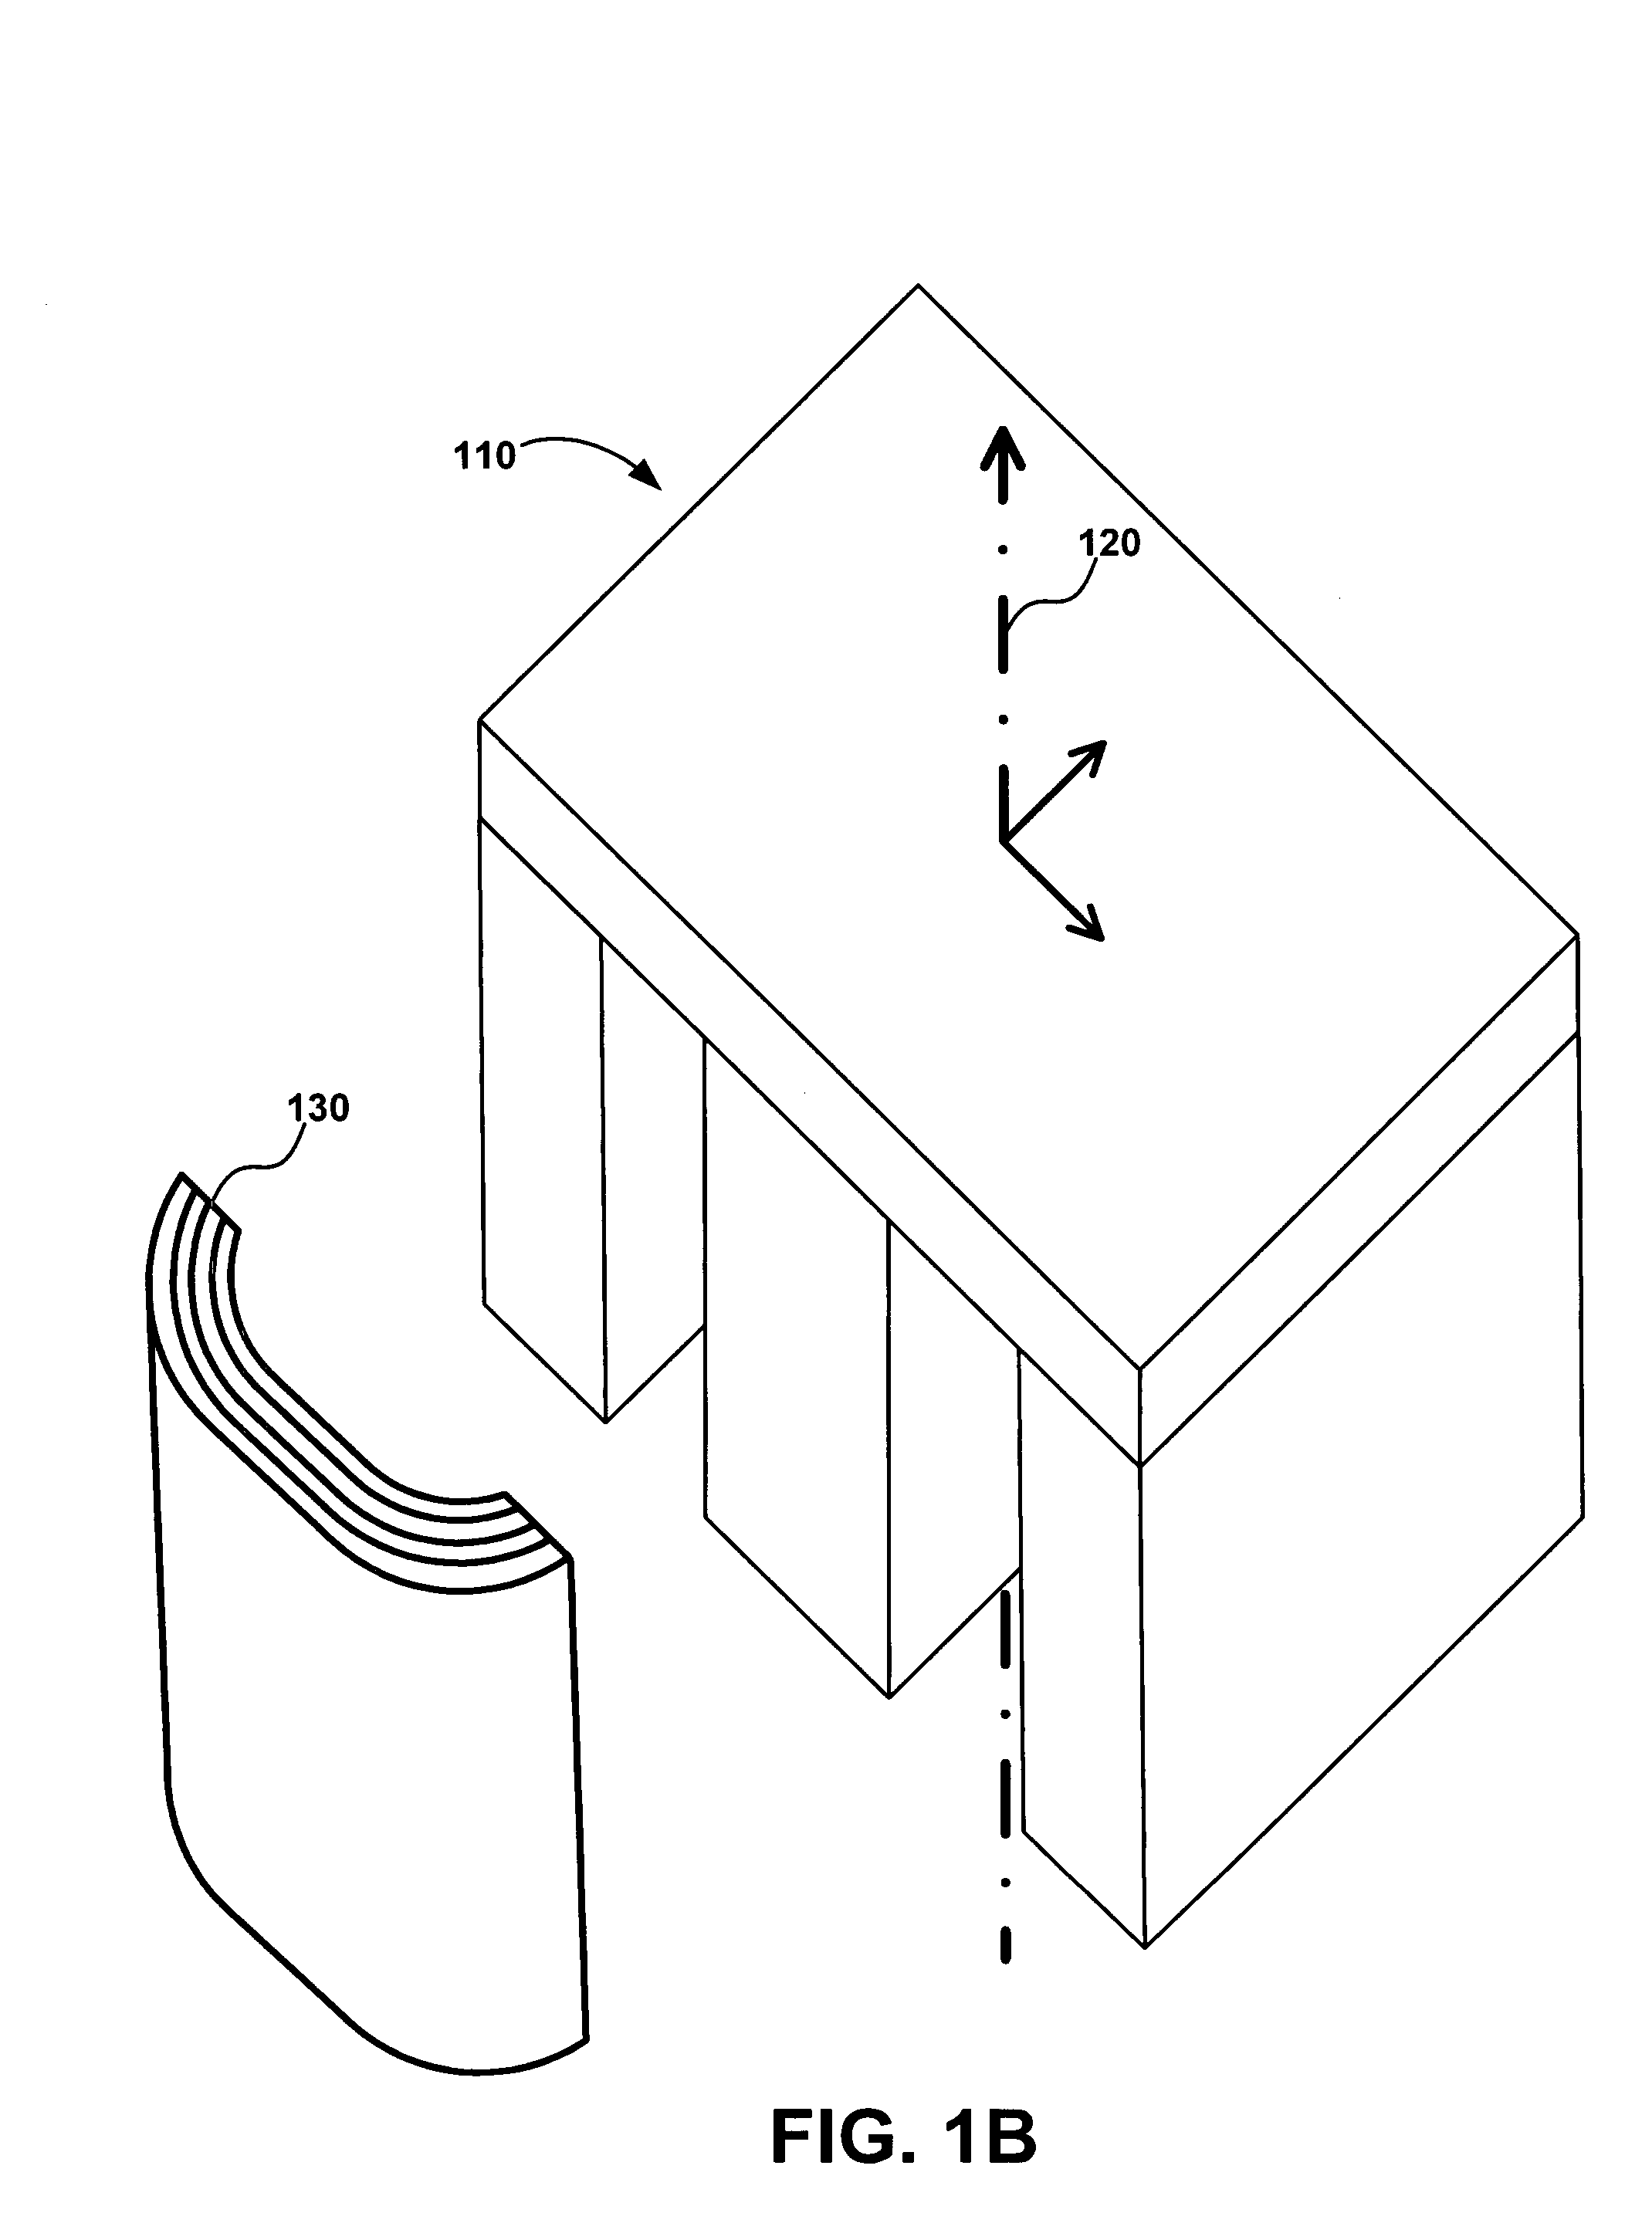 Cooled high power vehicle inductor and method